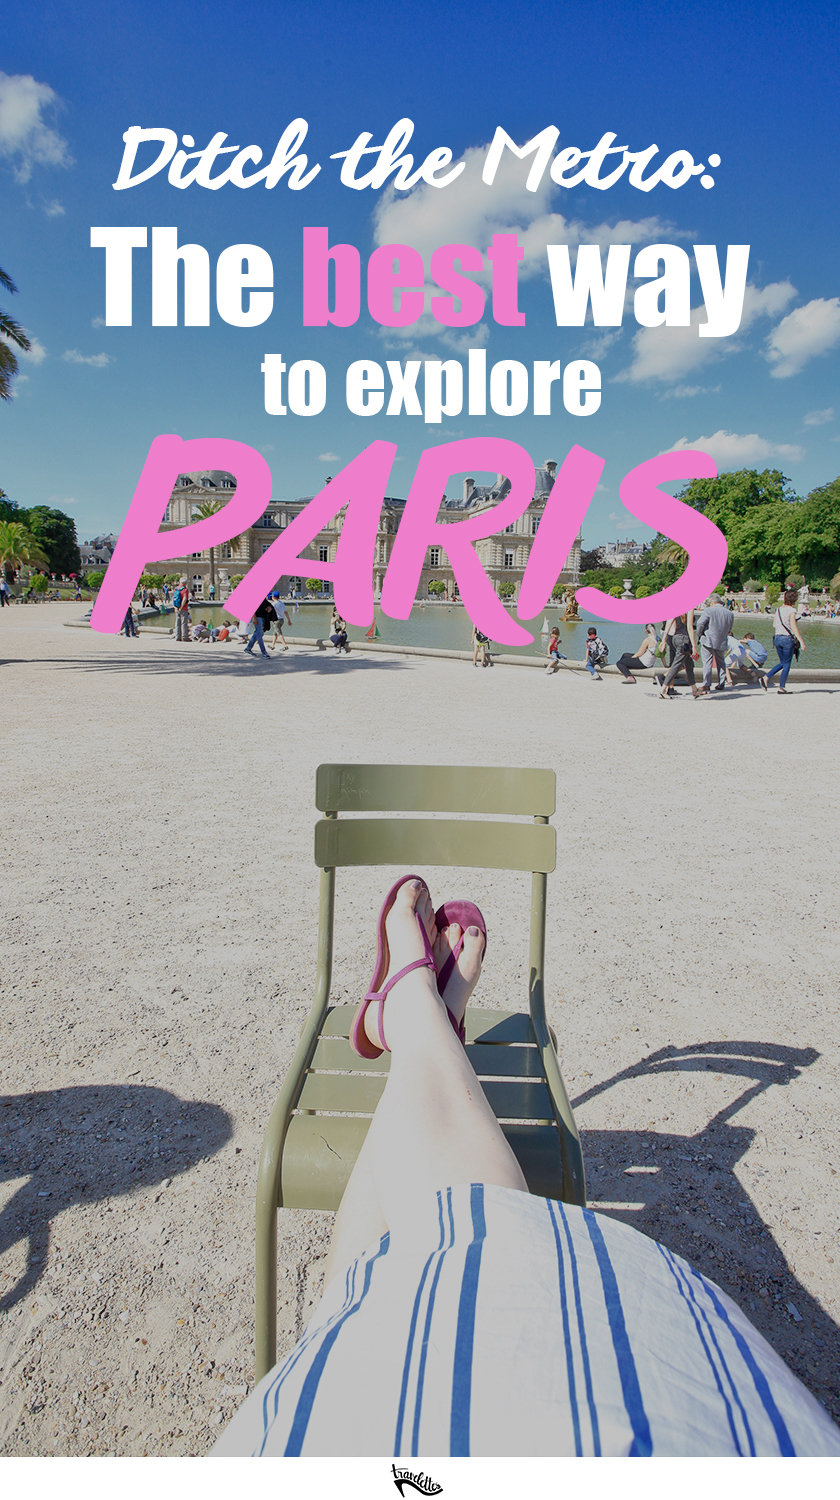 Next time you are in Paris, ditch the Metro and explore by foot - because despite its size, Paris is an incredibly walkable city!